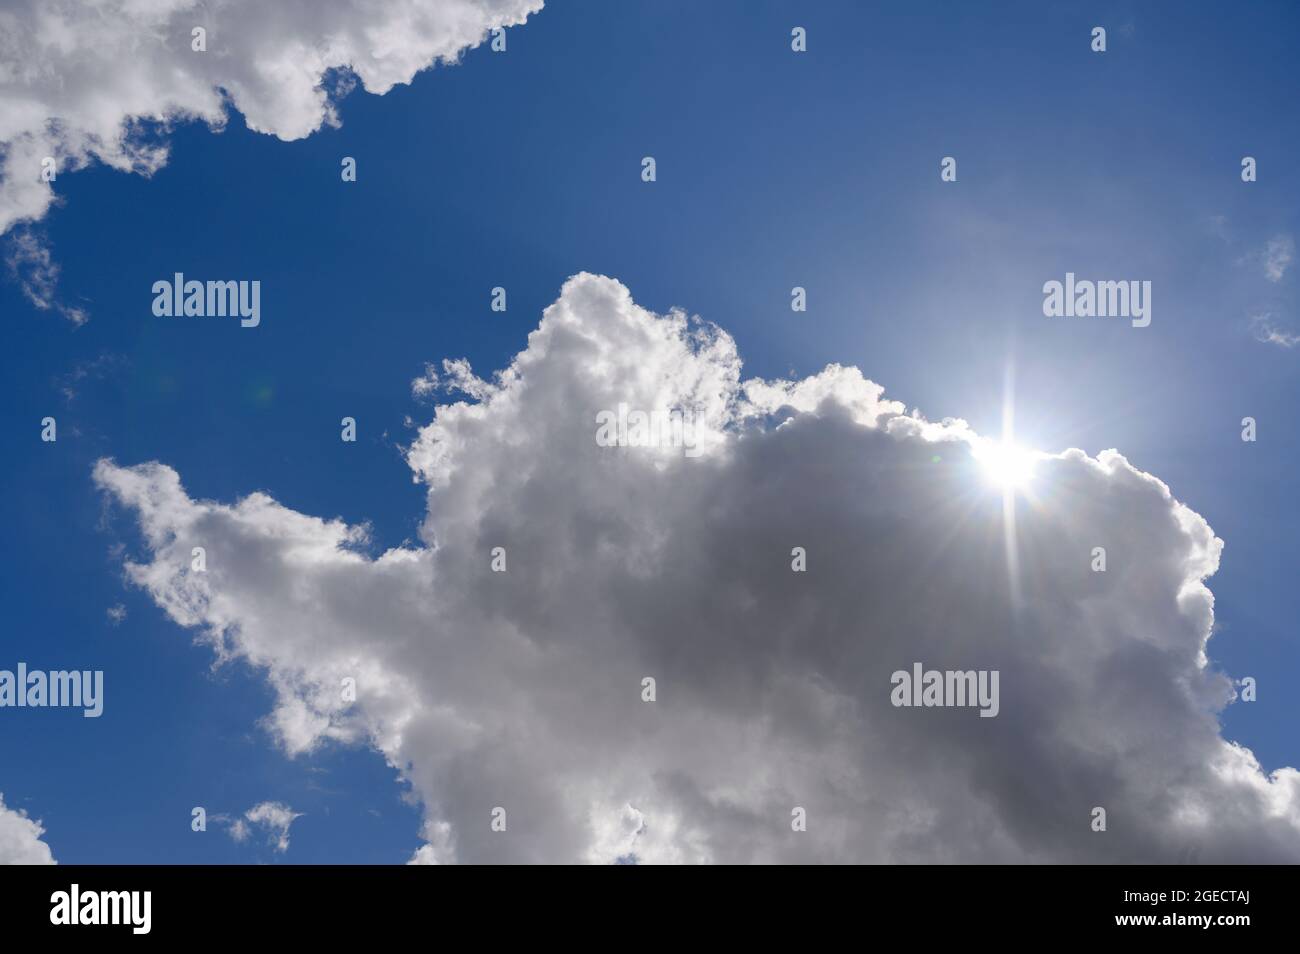 Fluffy white clouds passing in front of the sun in a bright blue sky. Stock Photo